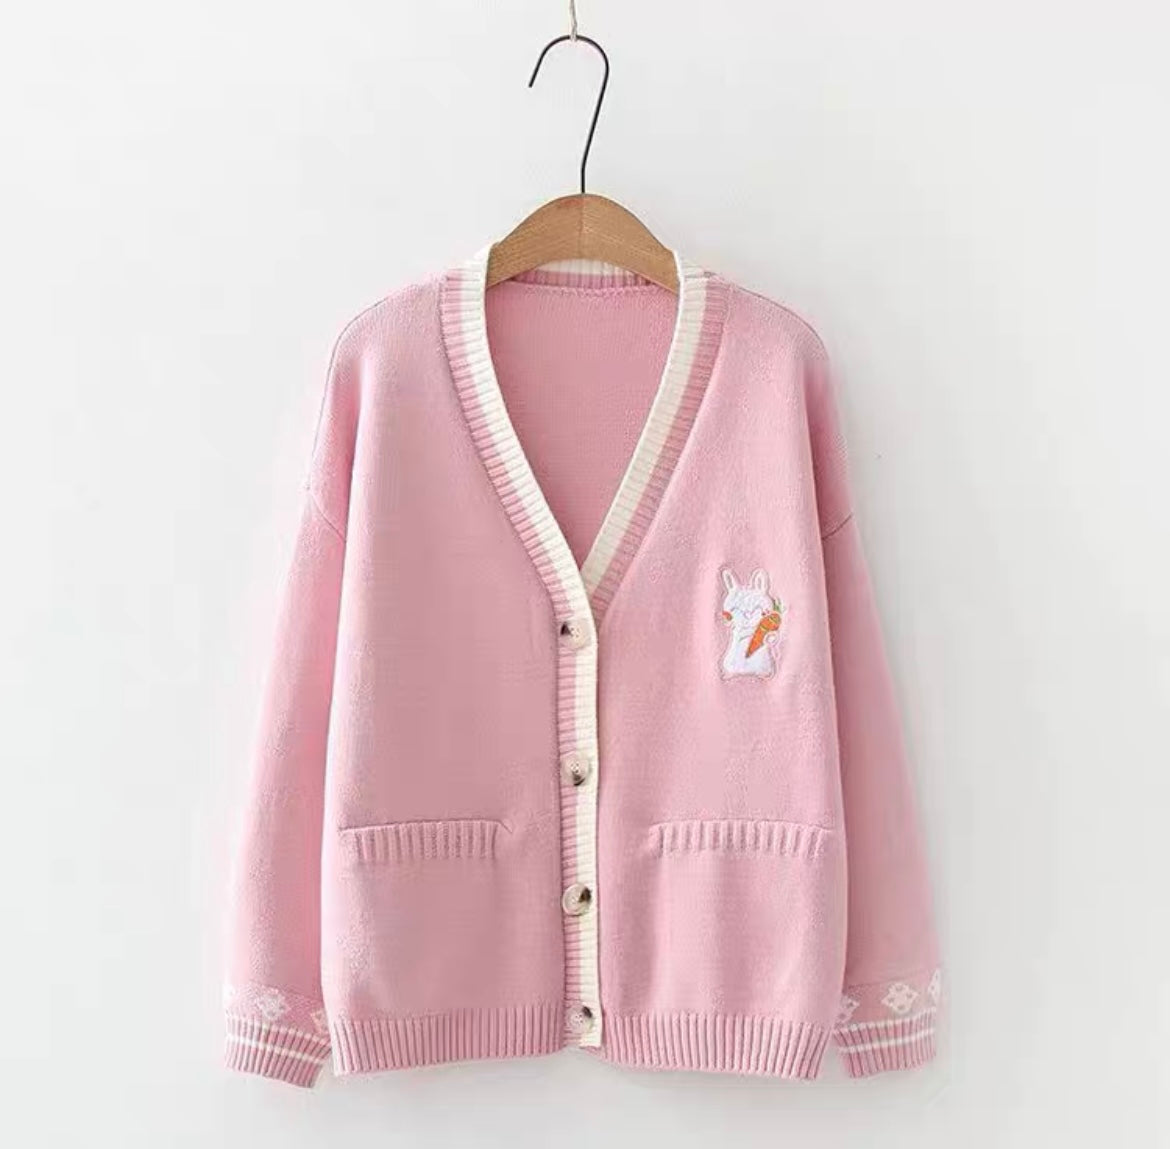 Bunny and Carrot Embroidery Sweater Cardigan